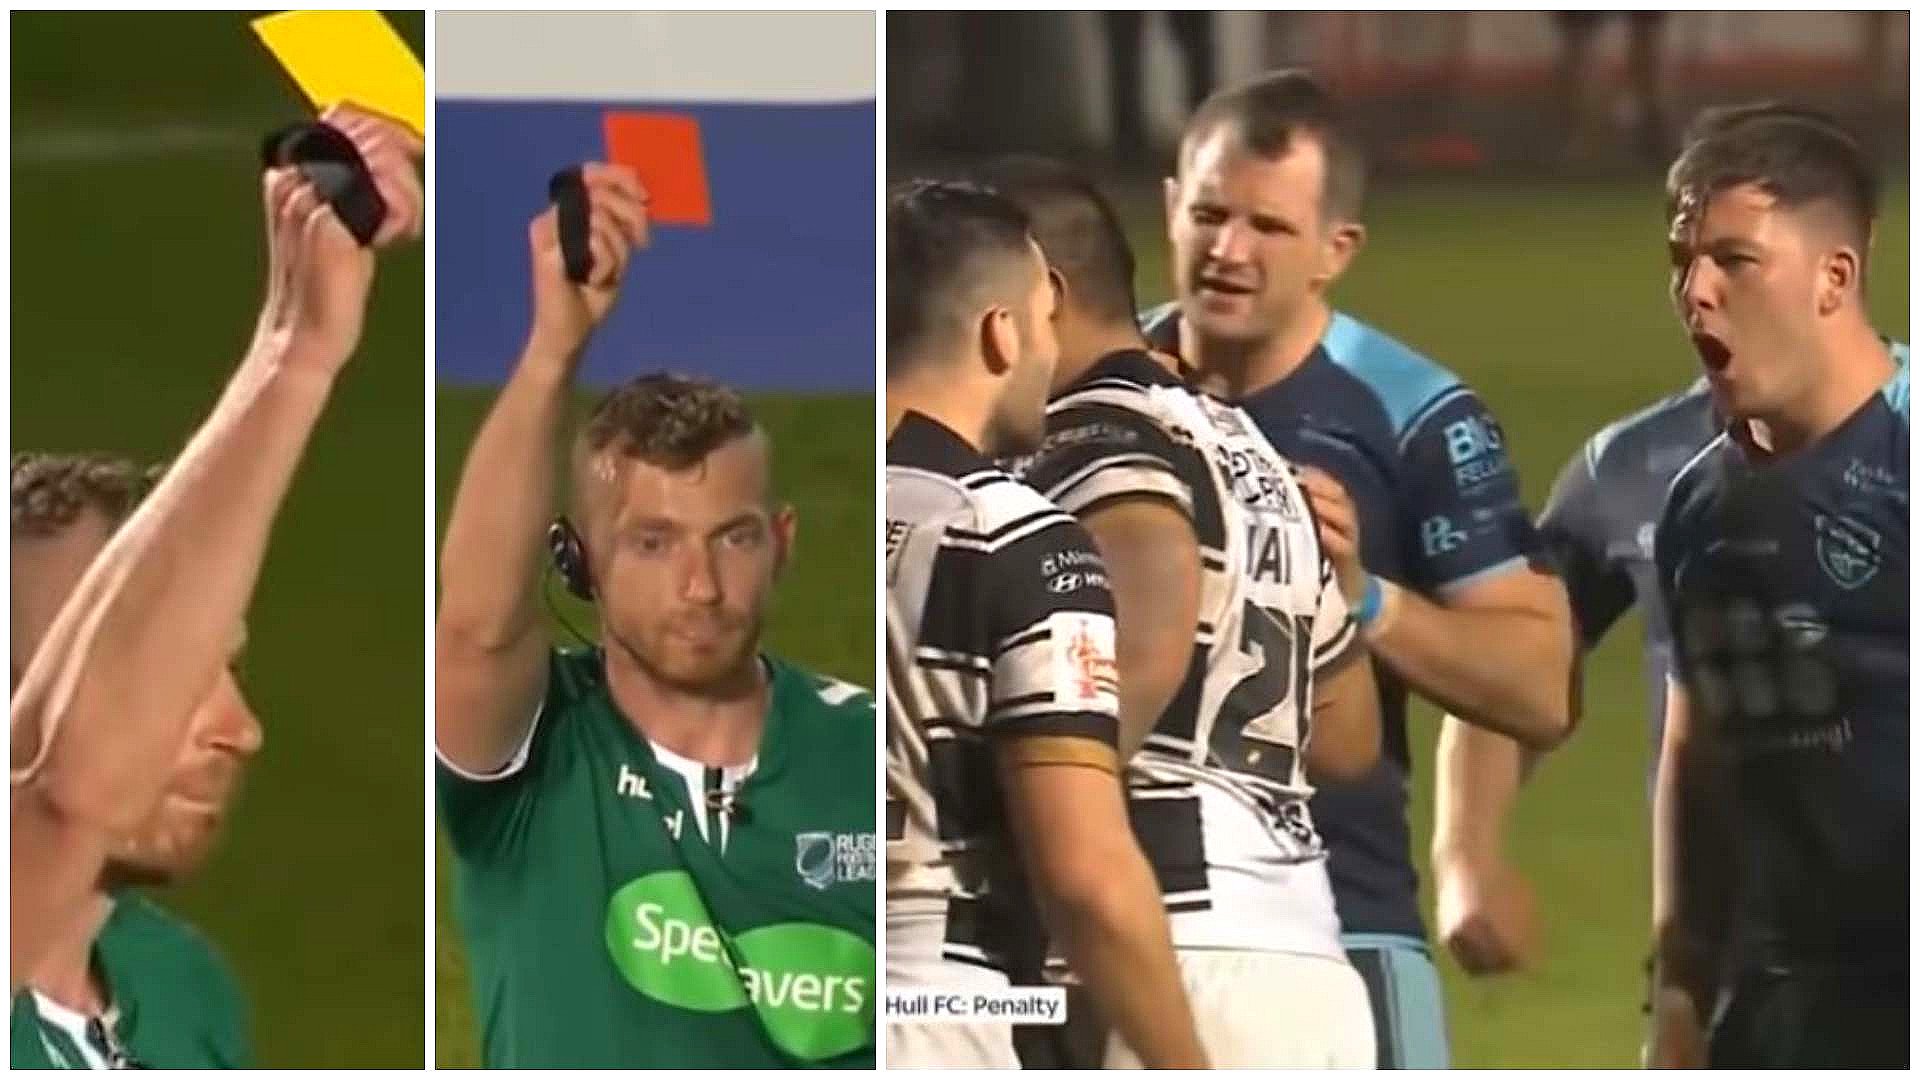 5 cards issued in League match within minutes after litany of frenzied savagery